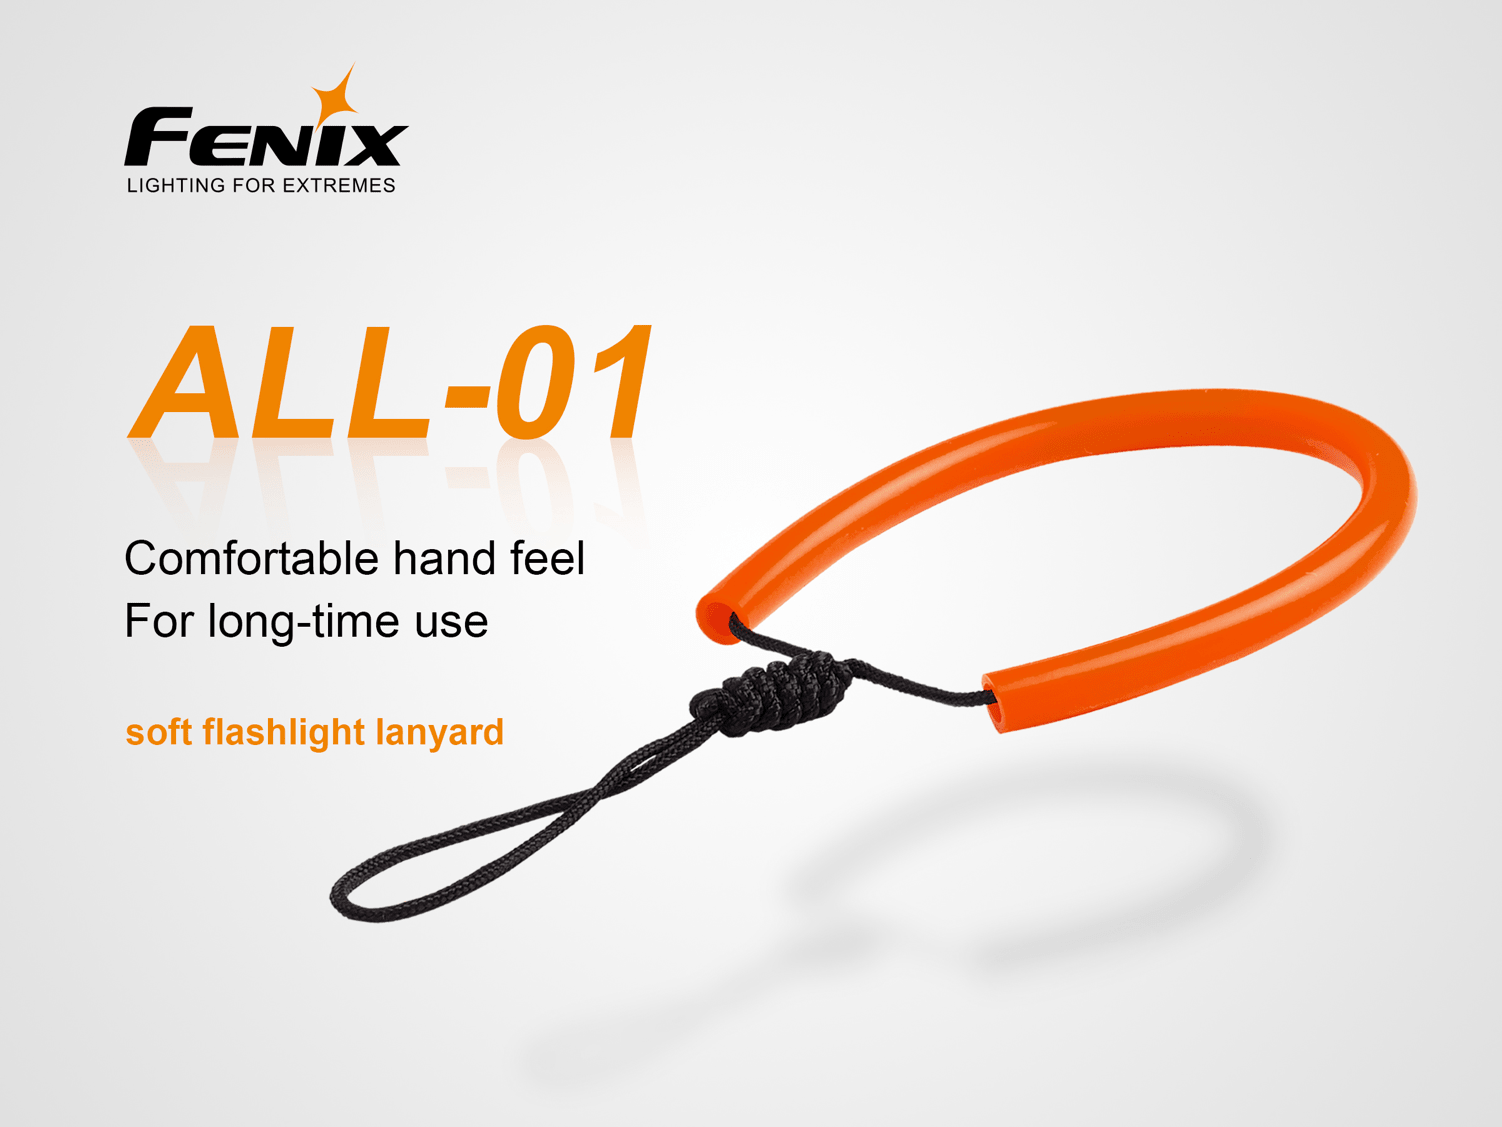 Fenix ALL 01 Soft Flashlight Lanyard, Strong strength Lanyard for grip on Large Heavy Flashlights, Comfortable and Soft Lanyard for Torches